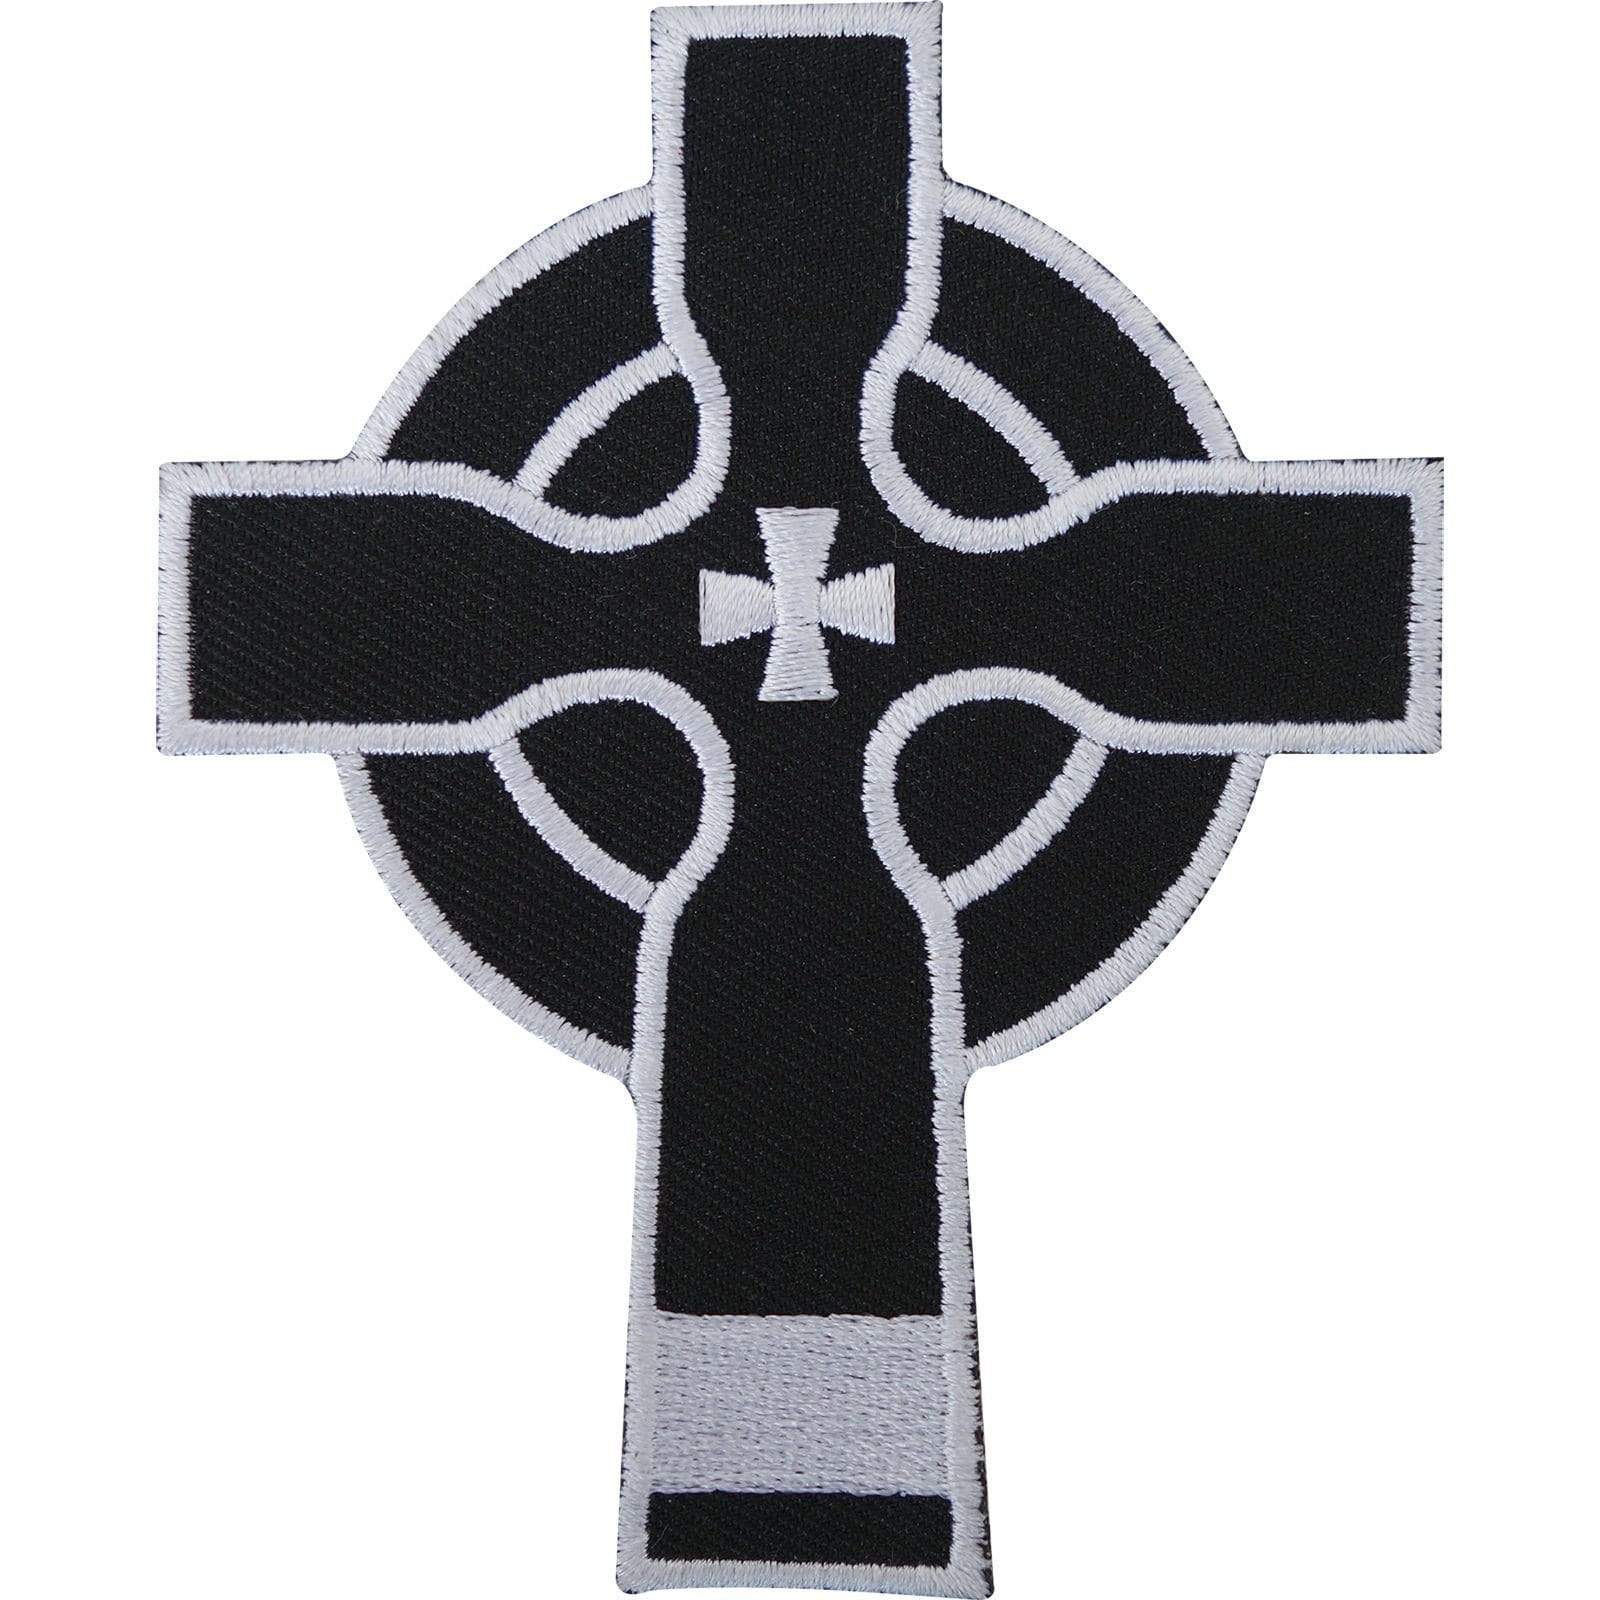 Celtic Cross Embroidered Iron / Sew On Patch T Shirt Motorcycle Jacket Bag Badge